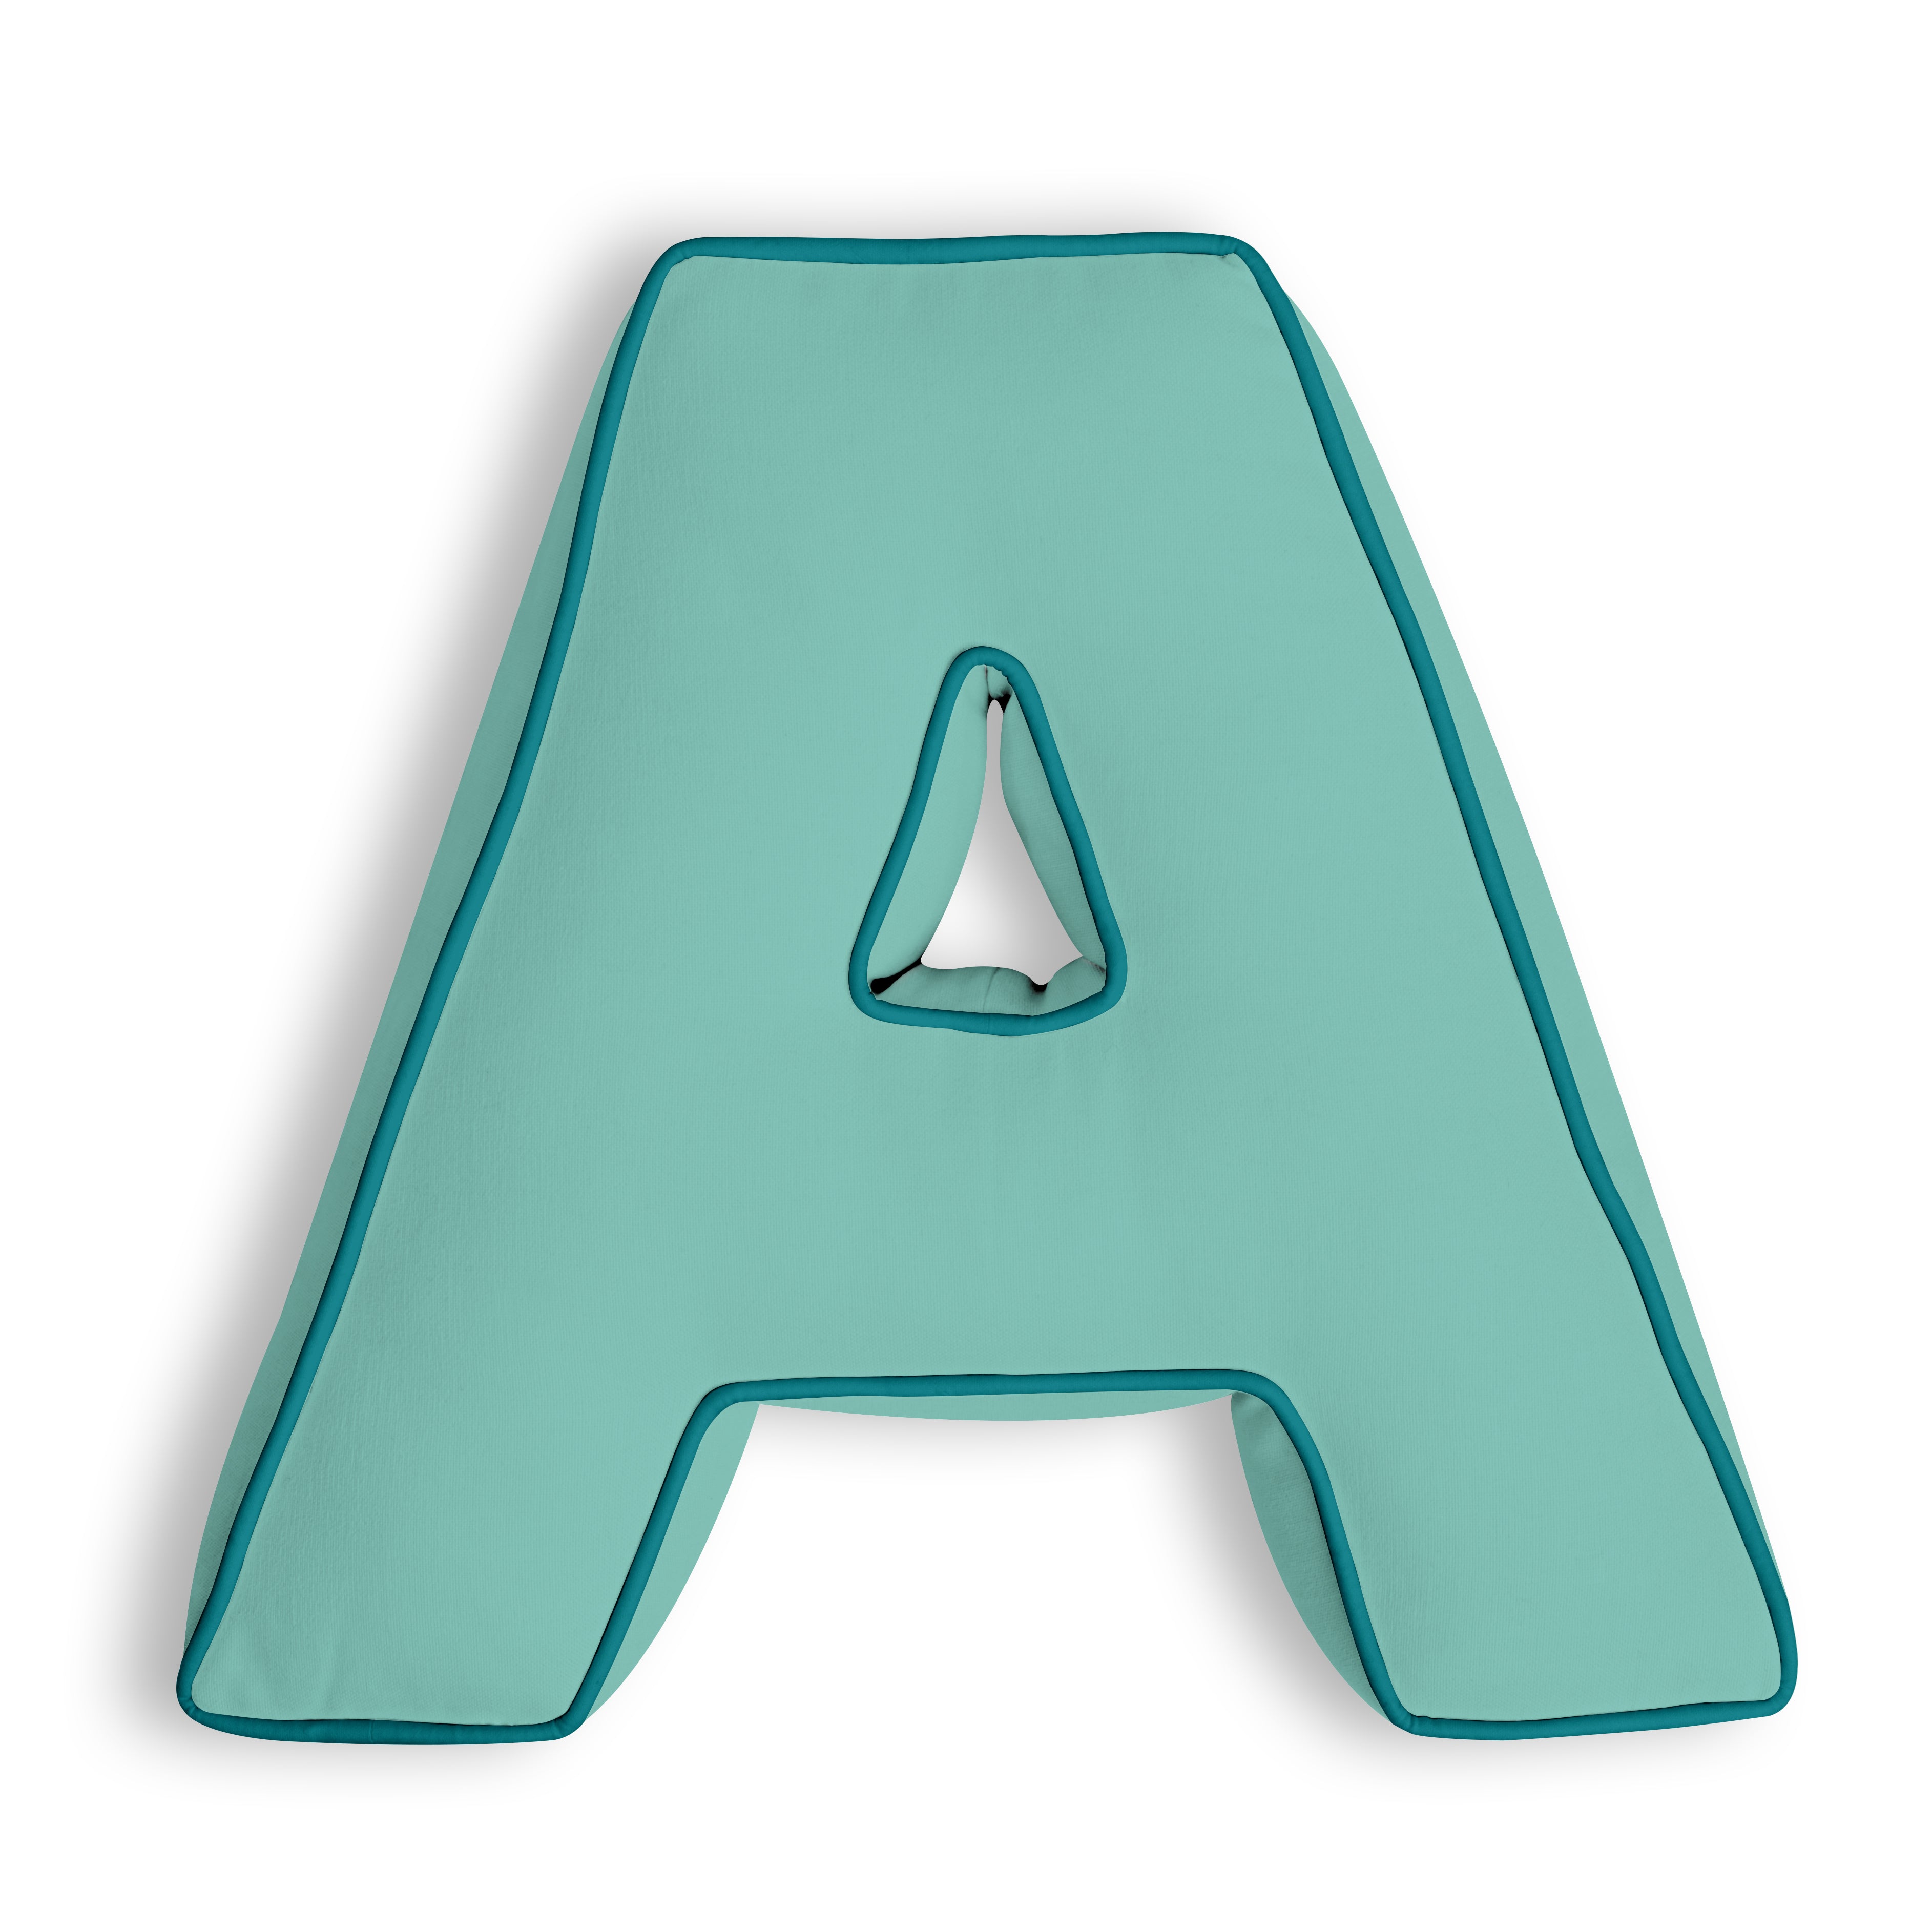 Personalised Letter Cushion 'A' in Soft Teal